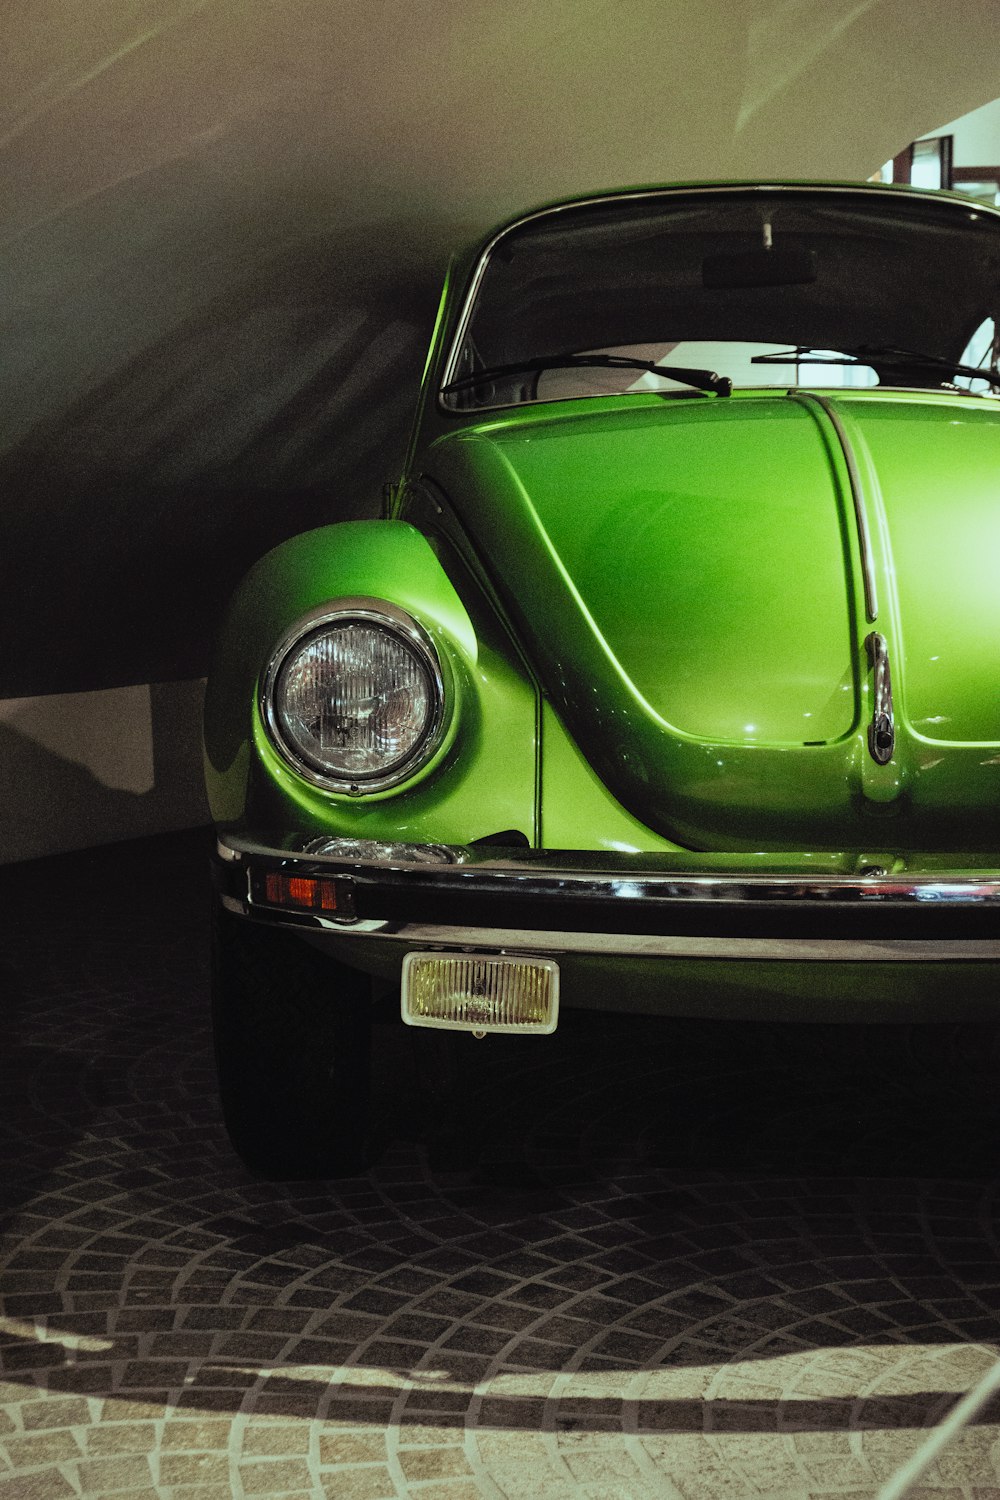 a green car is parked in a garage